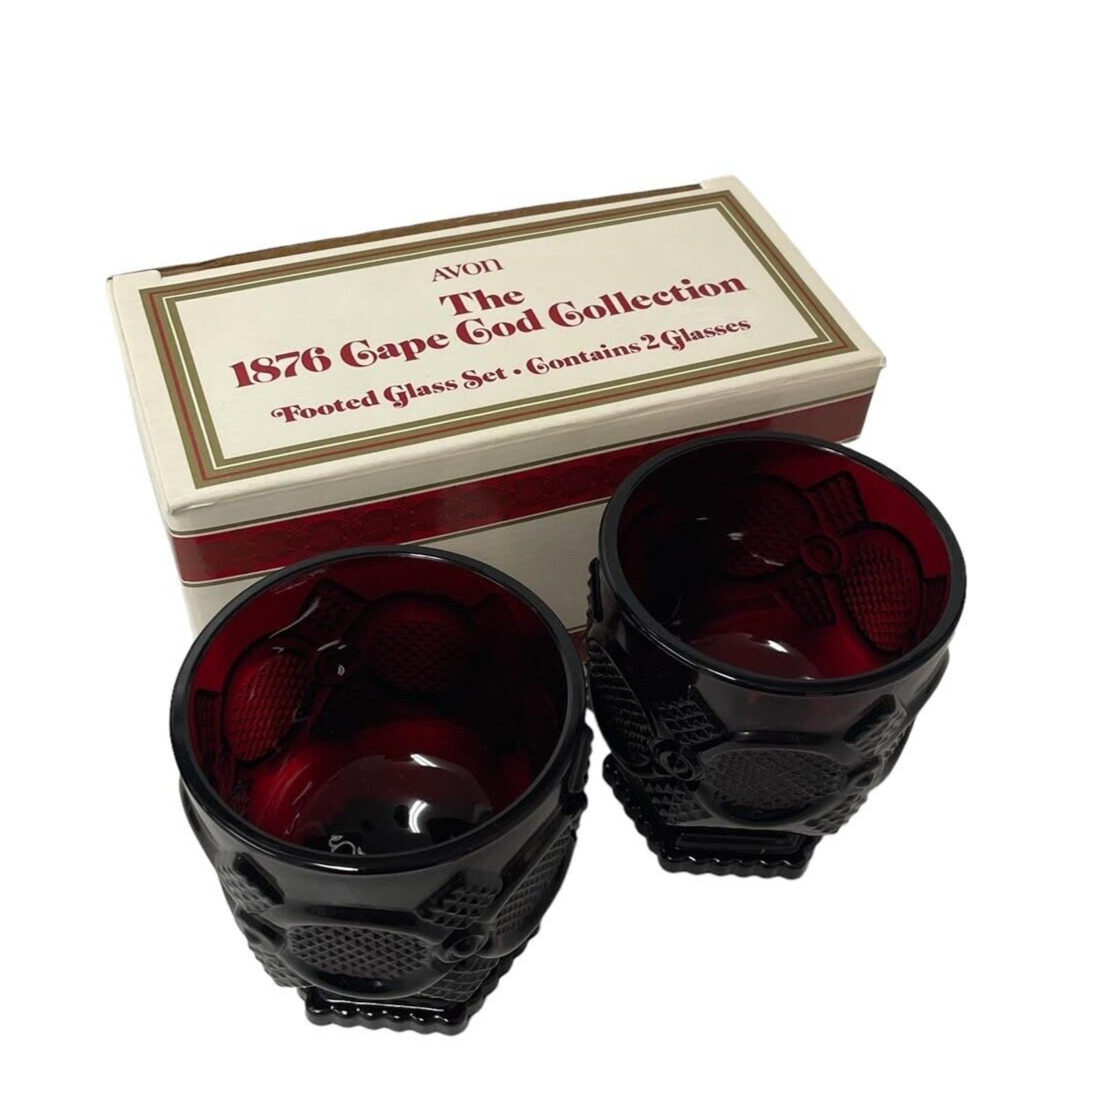 Avon 1876 Cape Cod Collection Footed Glass Set Dark Red Set Of 2 New In Box